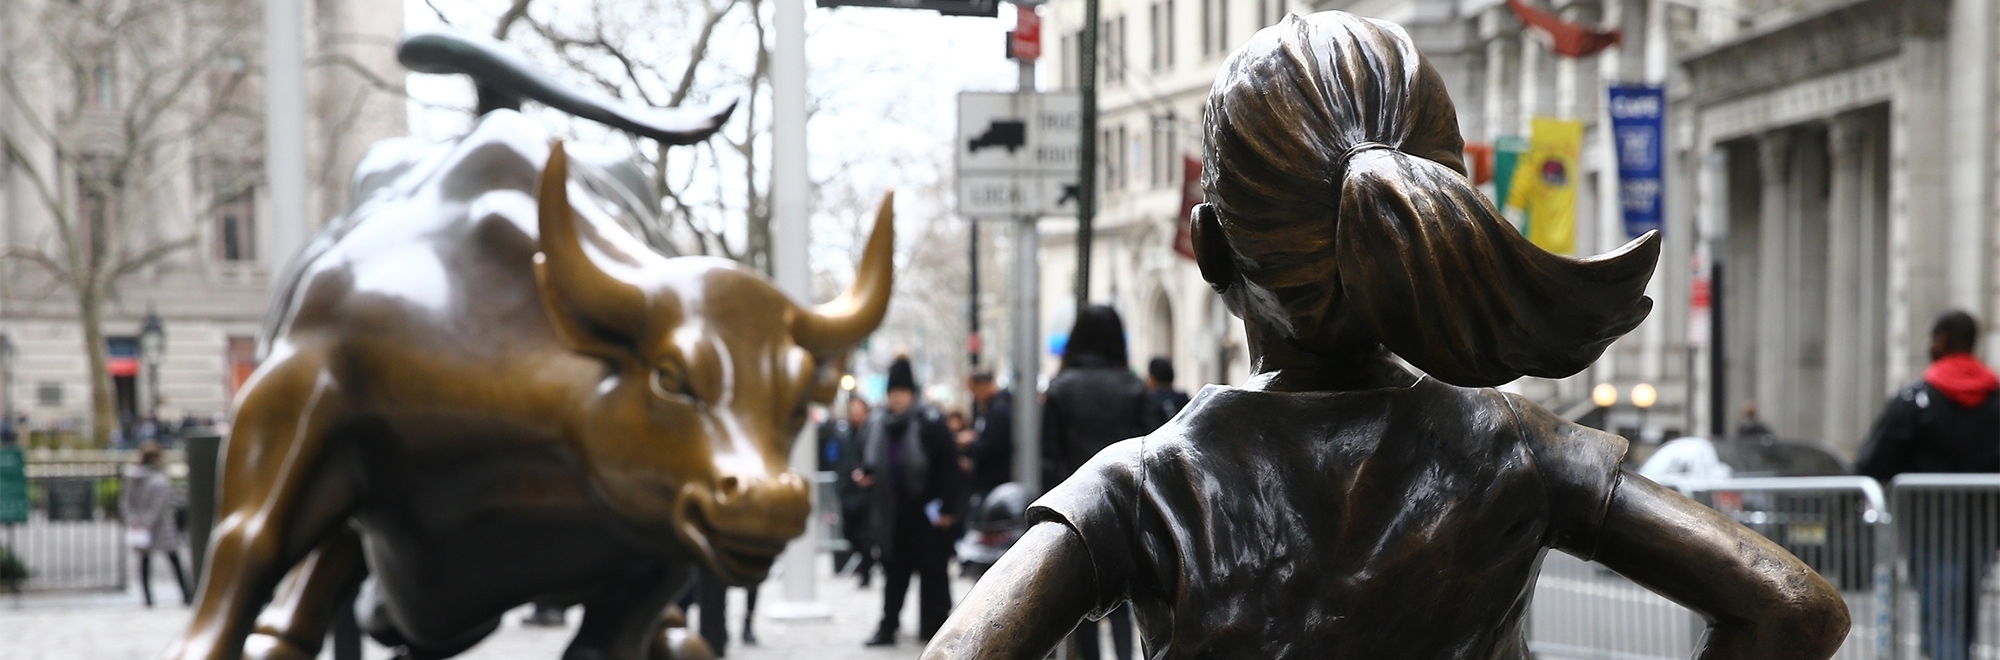 Is the Fearless Girl statue in New York art, commerce or vandalism?